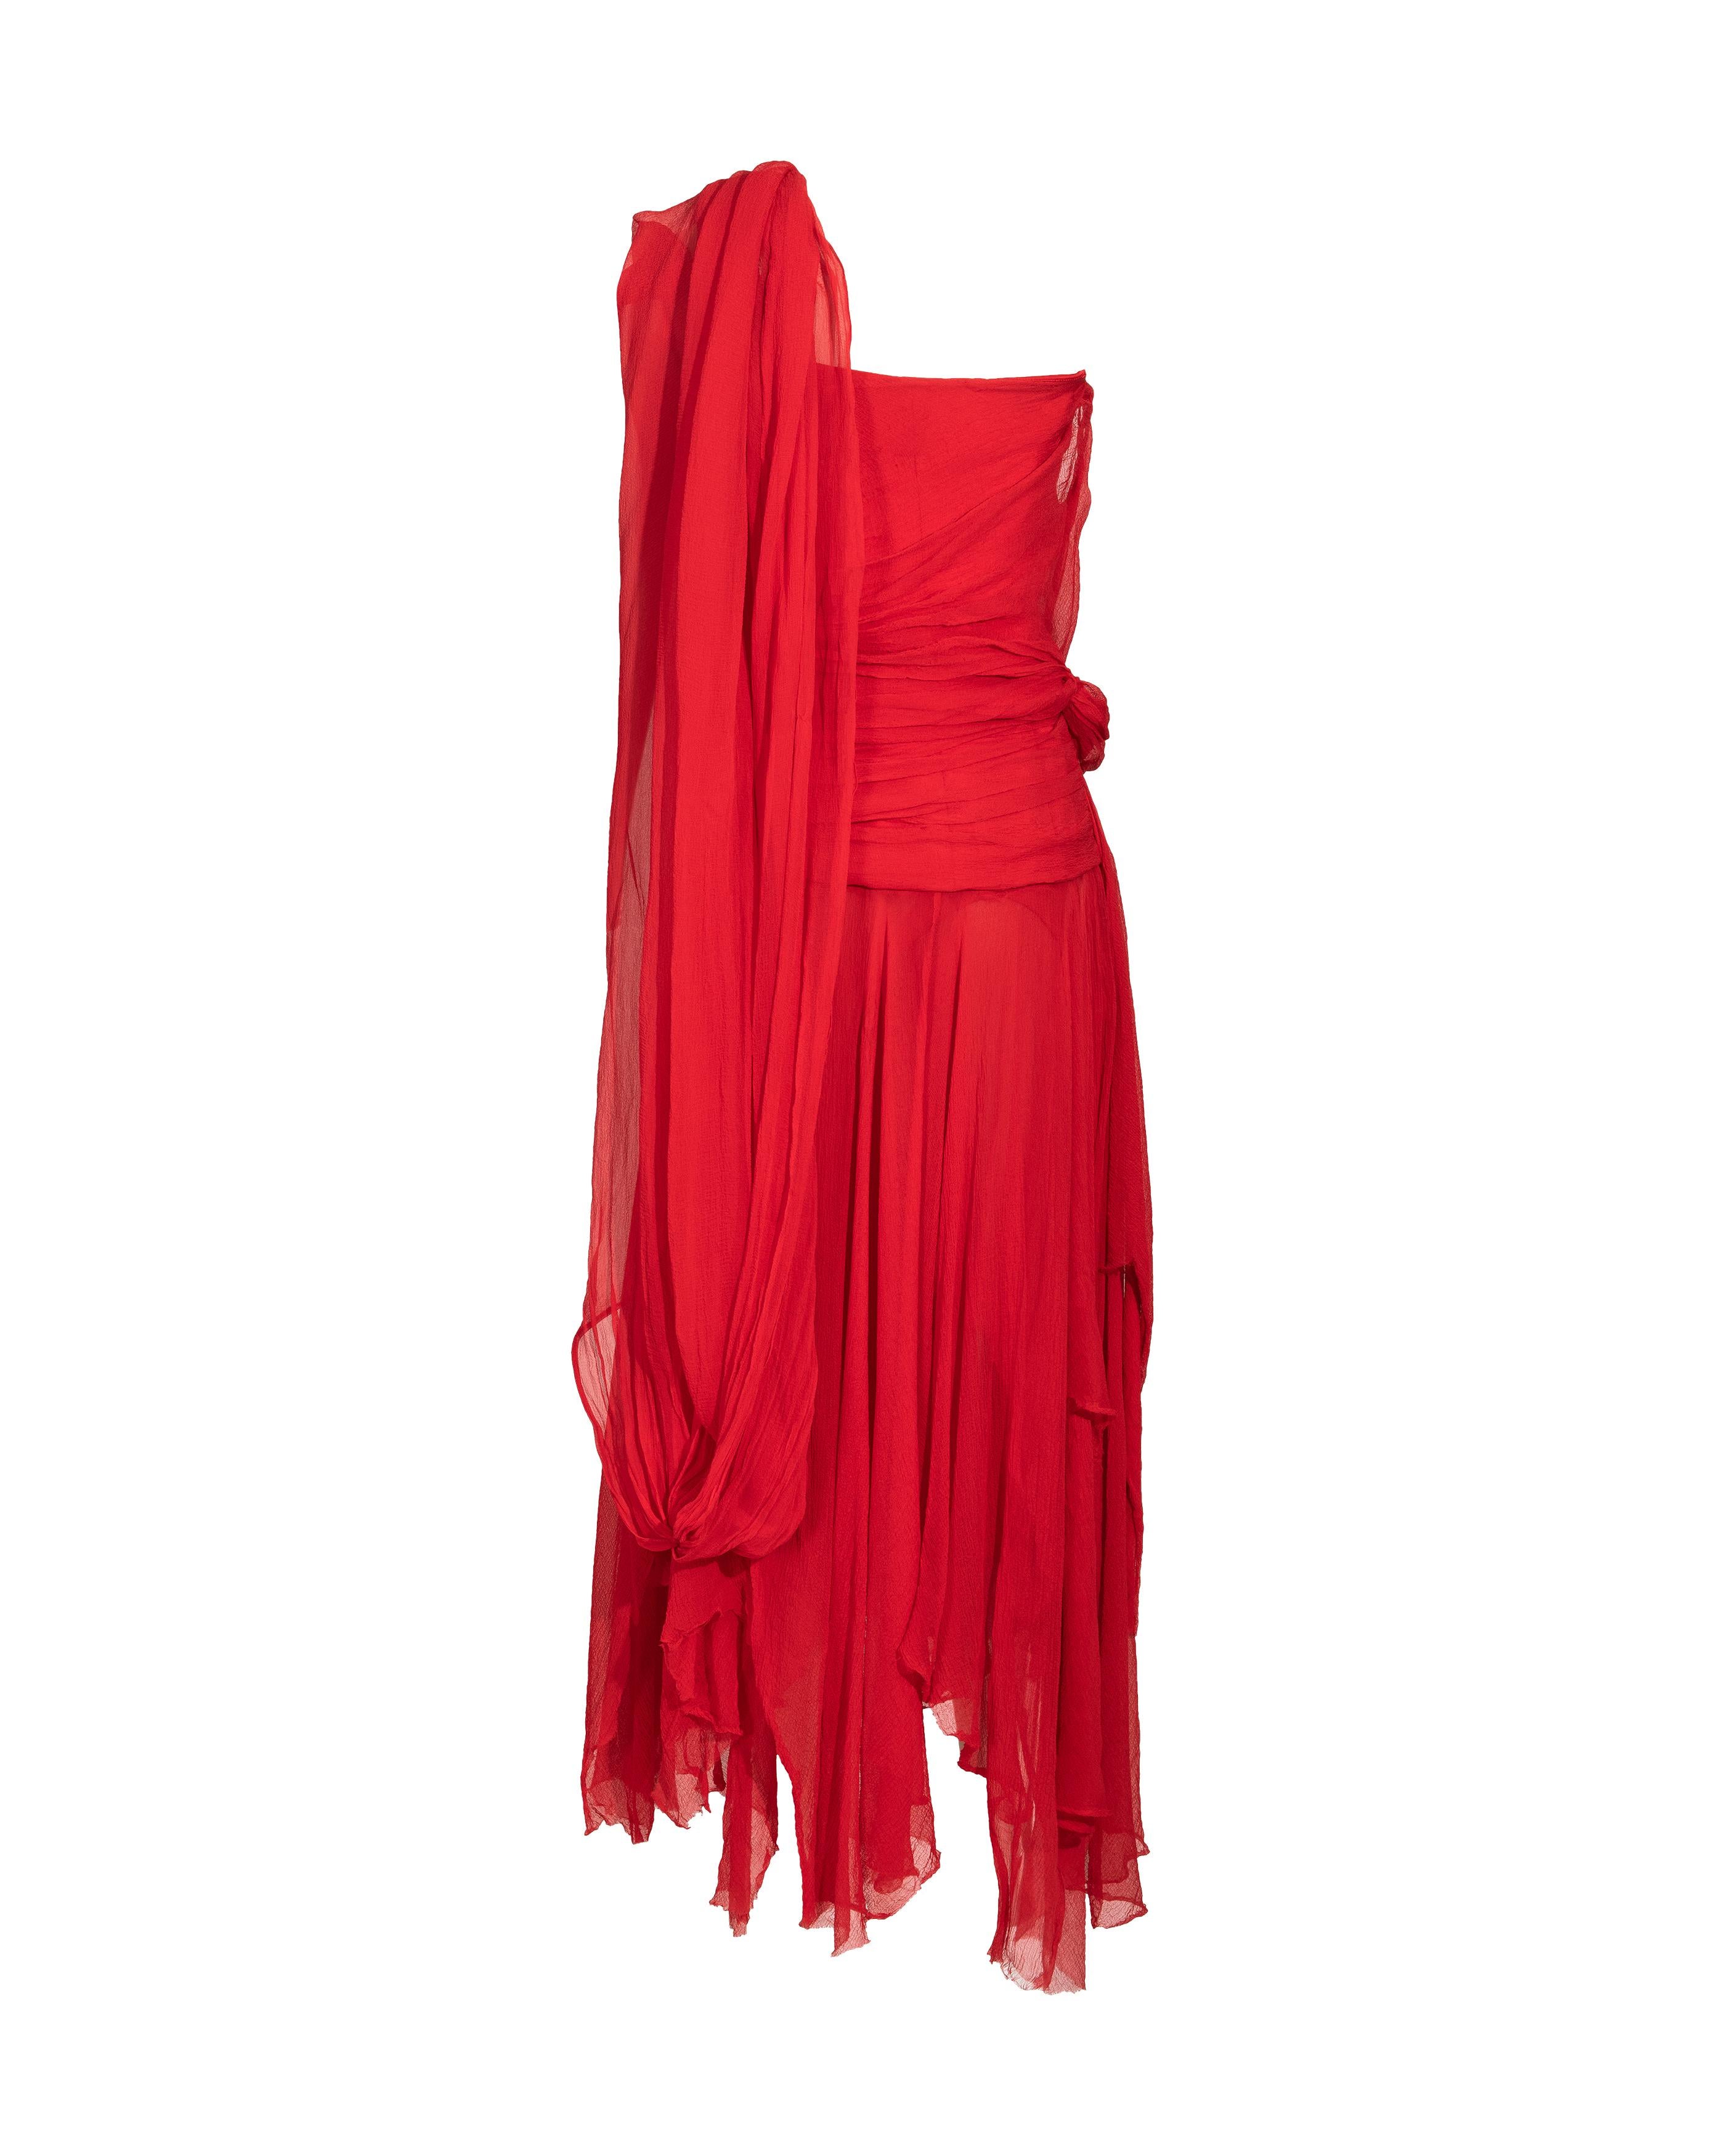 S/S 2003 Alexander McQueen  'Irere' Collection Red Silk Chiffon Gown with Sash 11